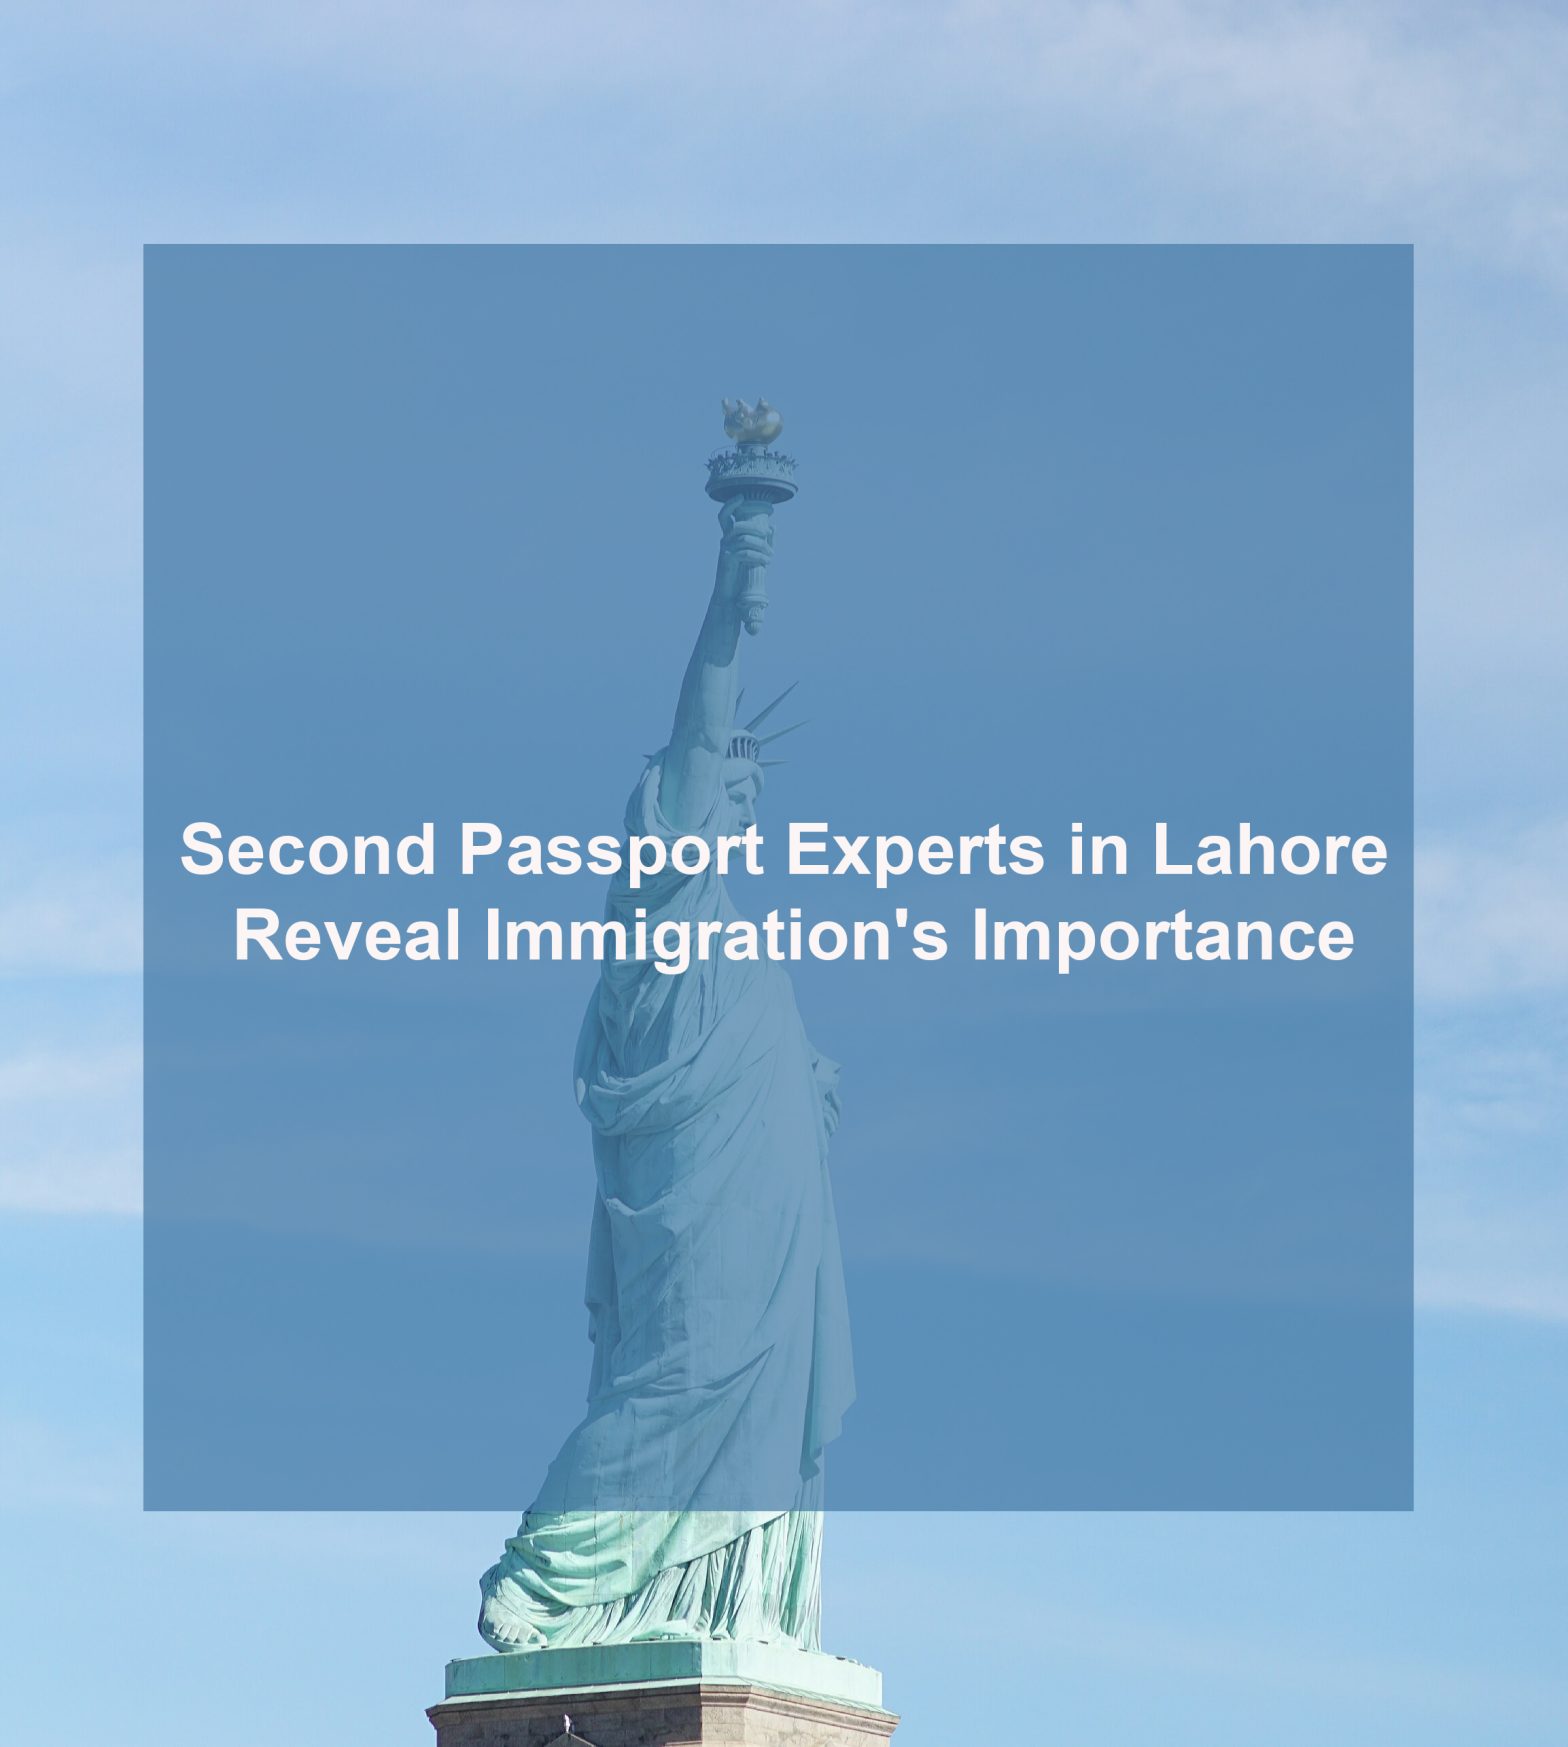 Let's Discuss Immigration's Importance by the Second Passport Experts in Lahore